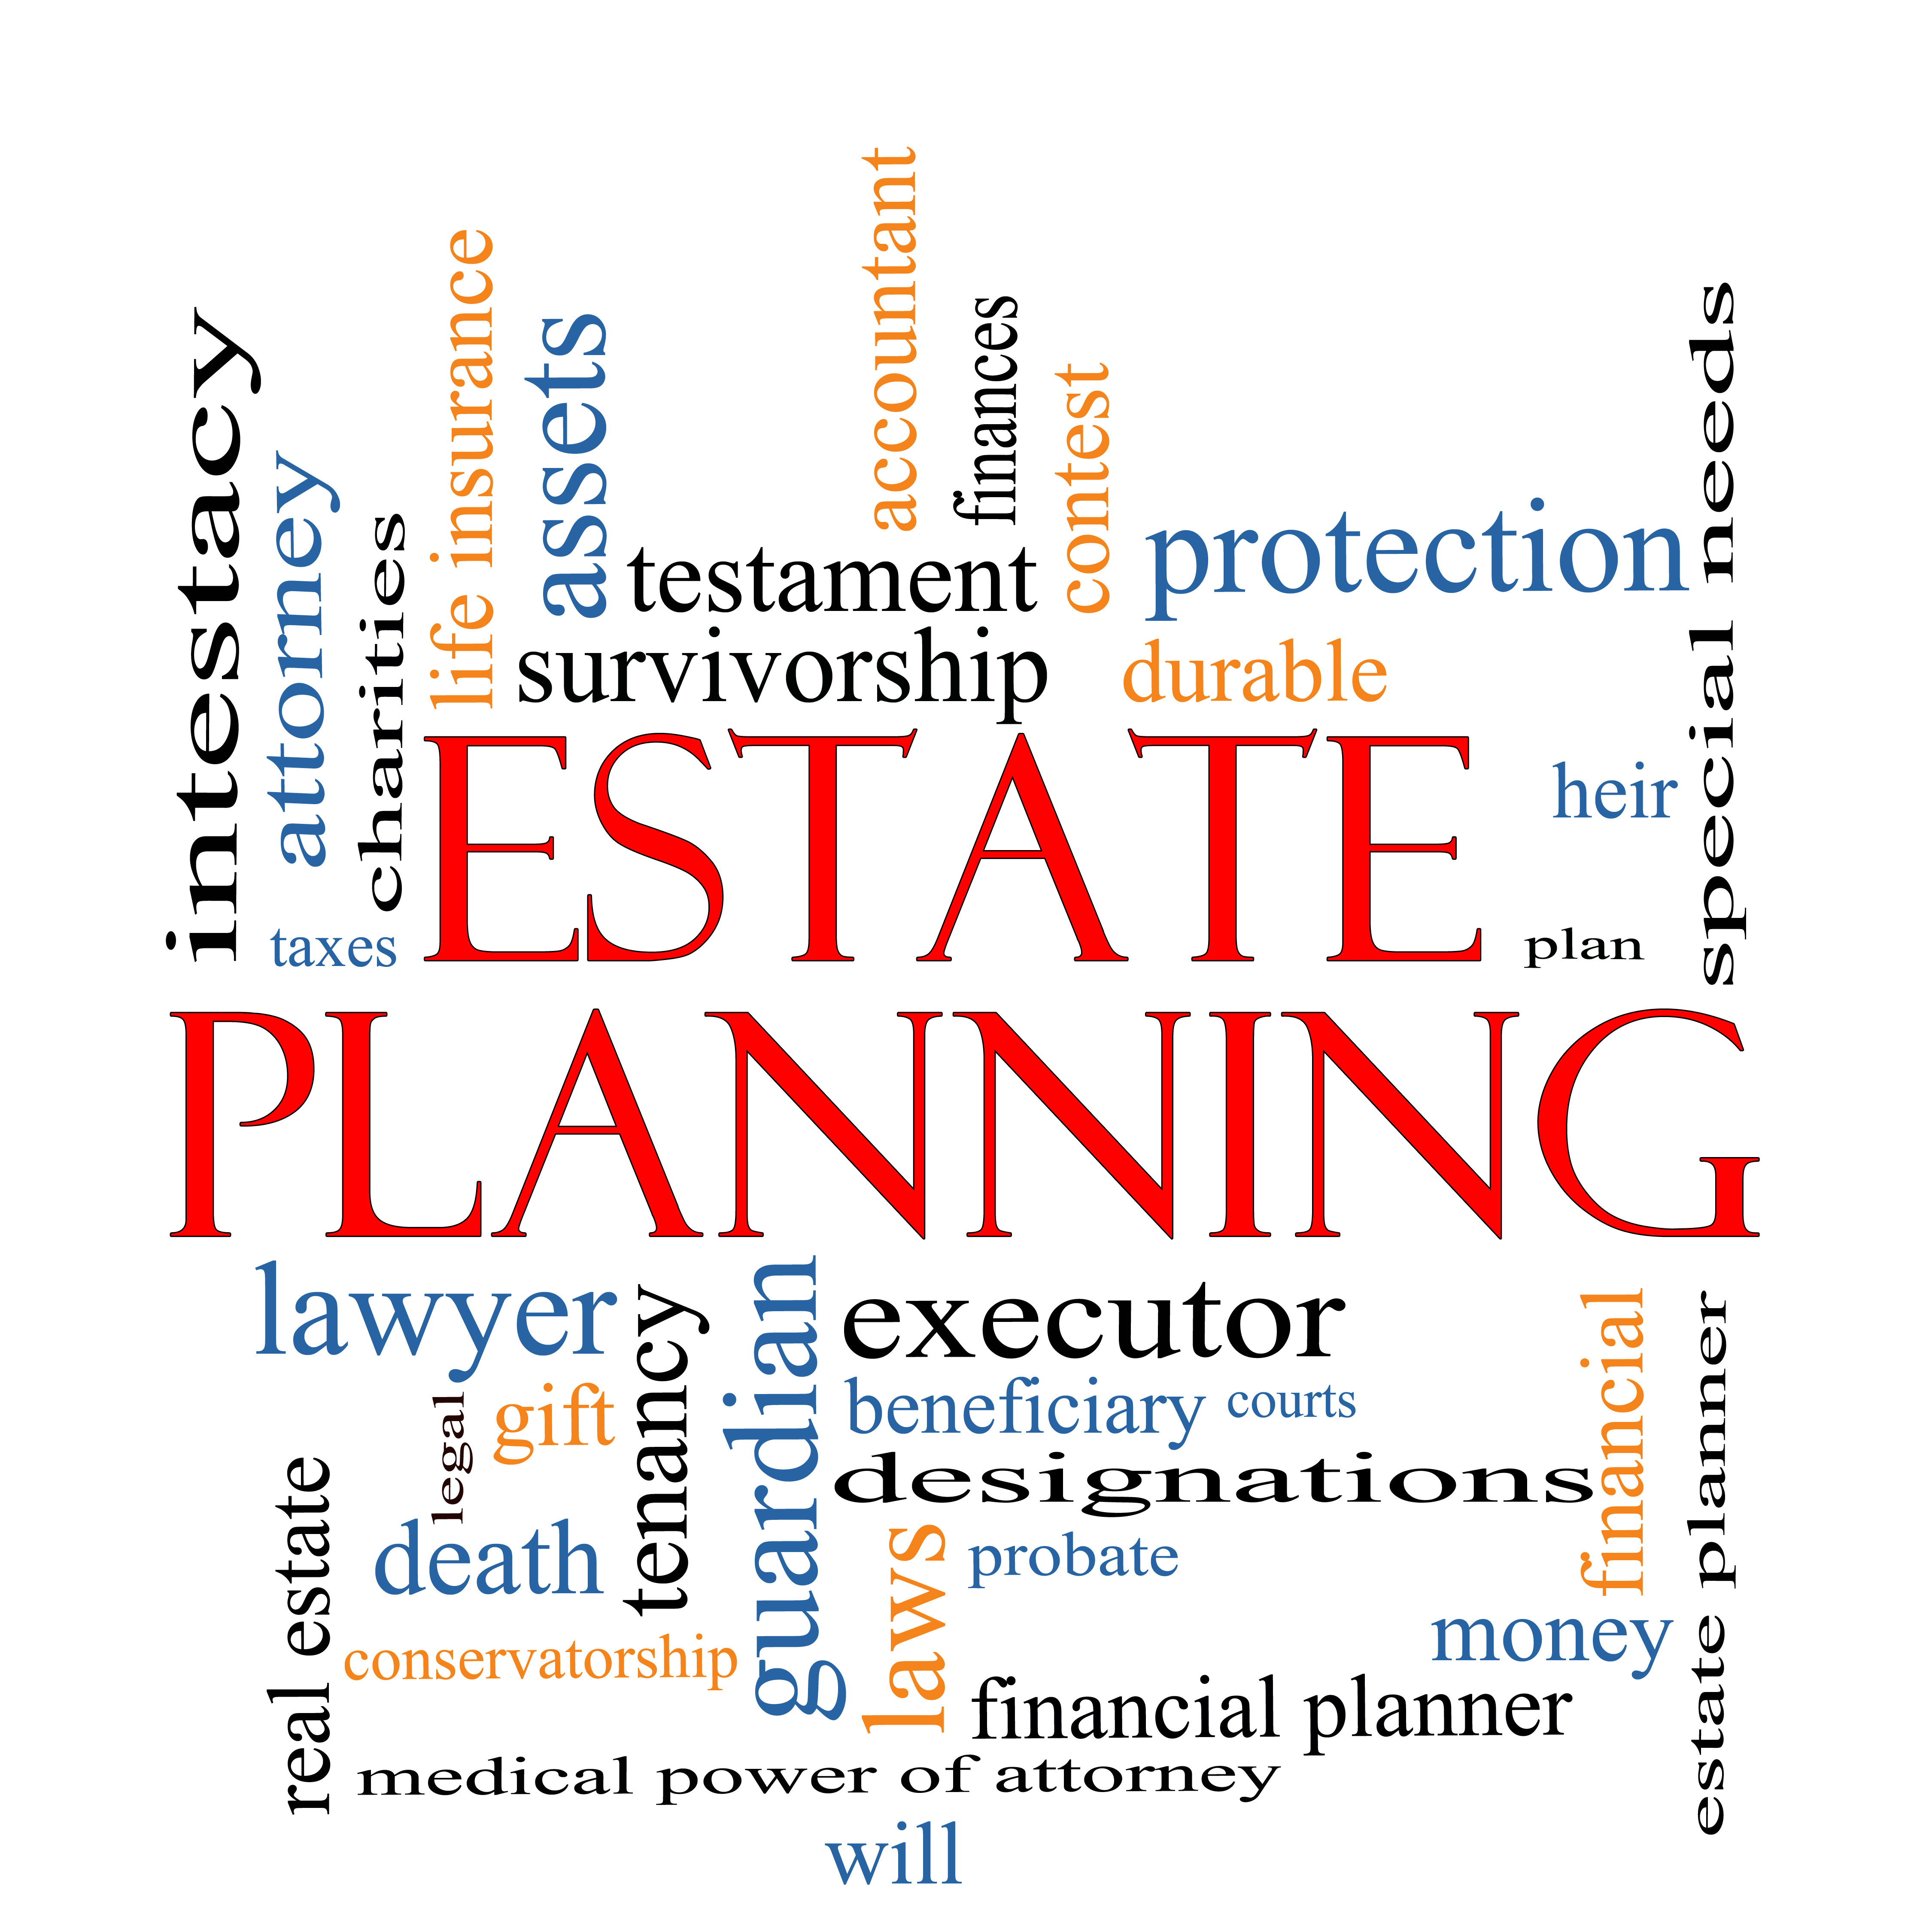 Top Five Estate Planning Mistakes